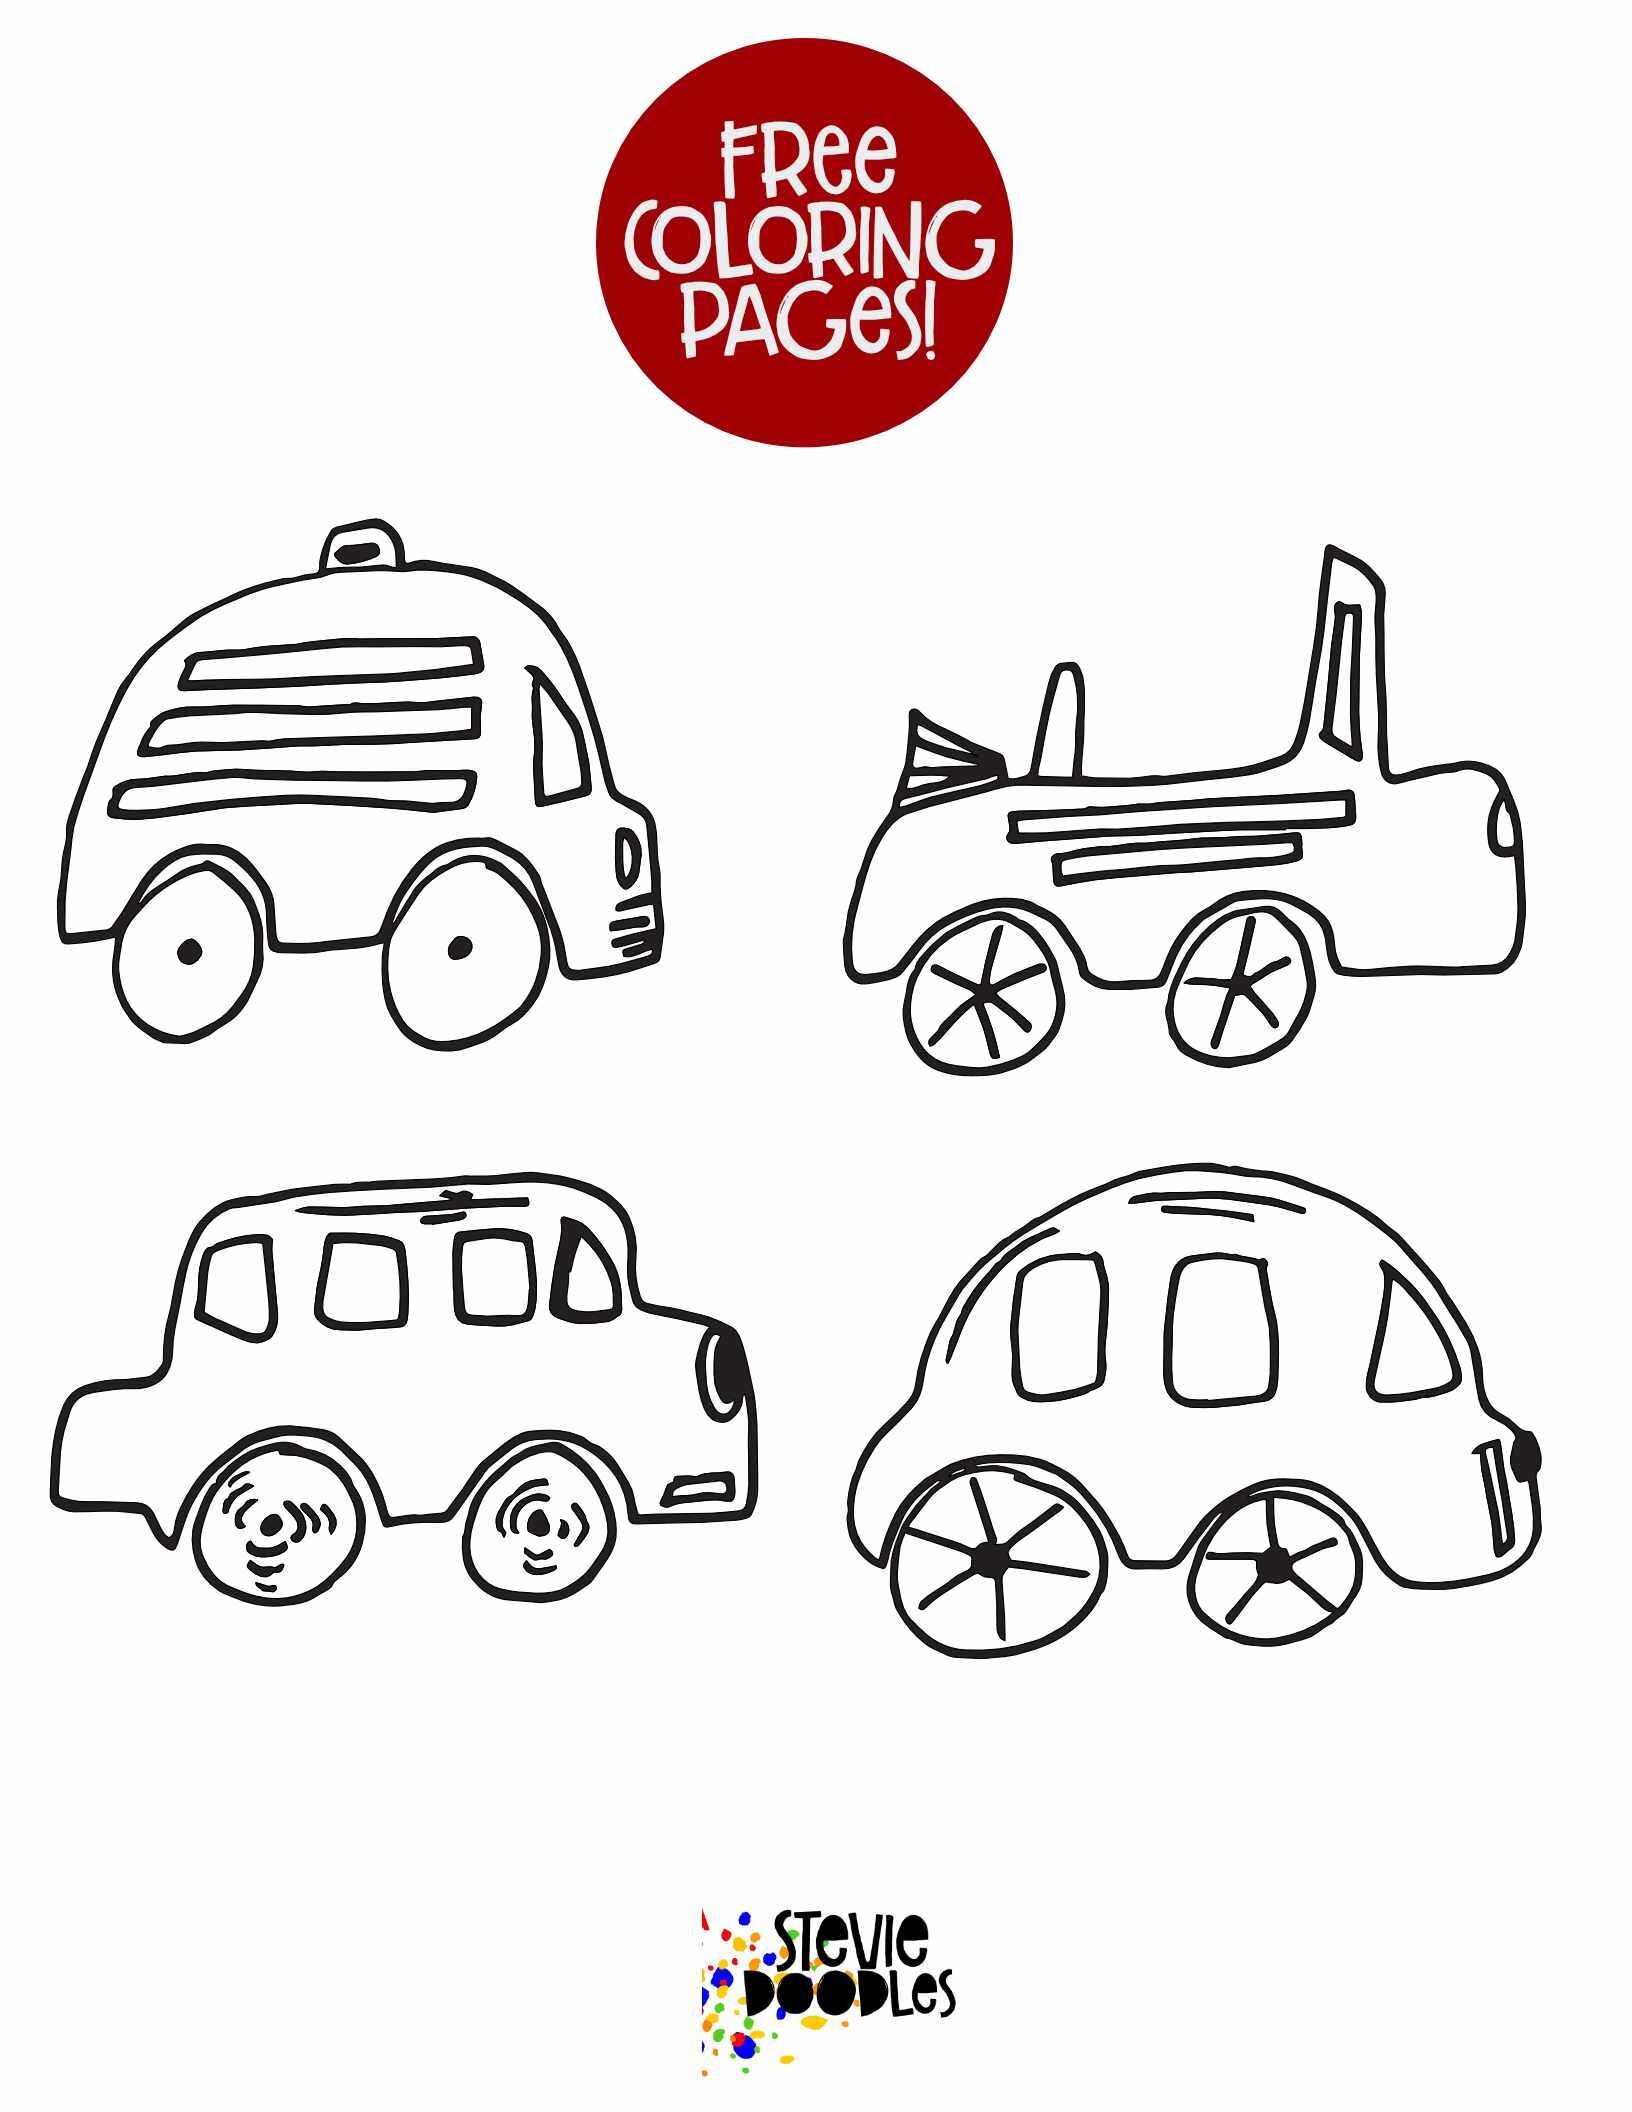 Free Printable Kids Coloring Page! 4 Simple Little Cars!